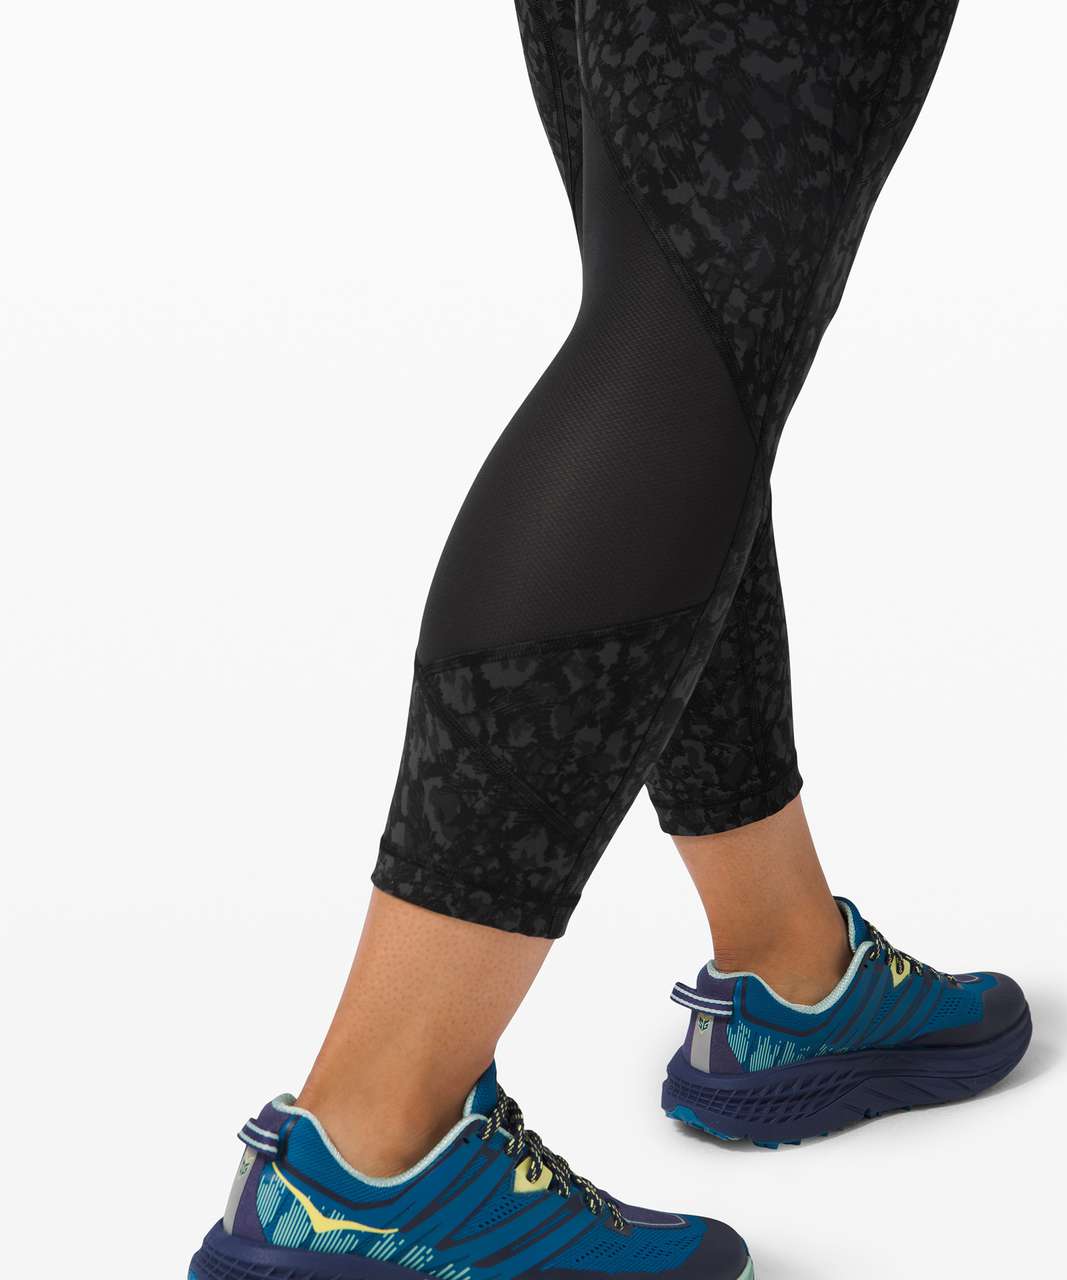 Lululemon Pace Pusher High Rise Crop Leggings Black Animal Print Reflective  8 - $62 - From Marie